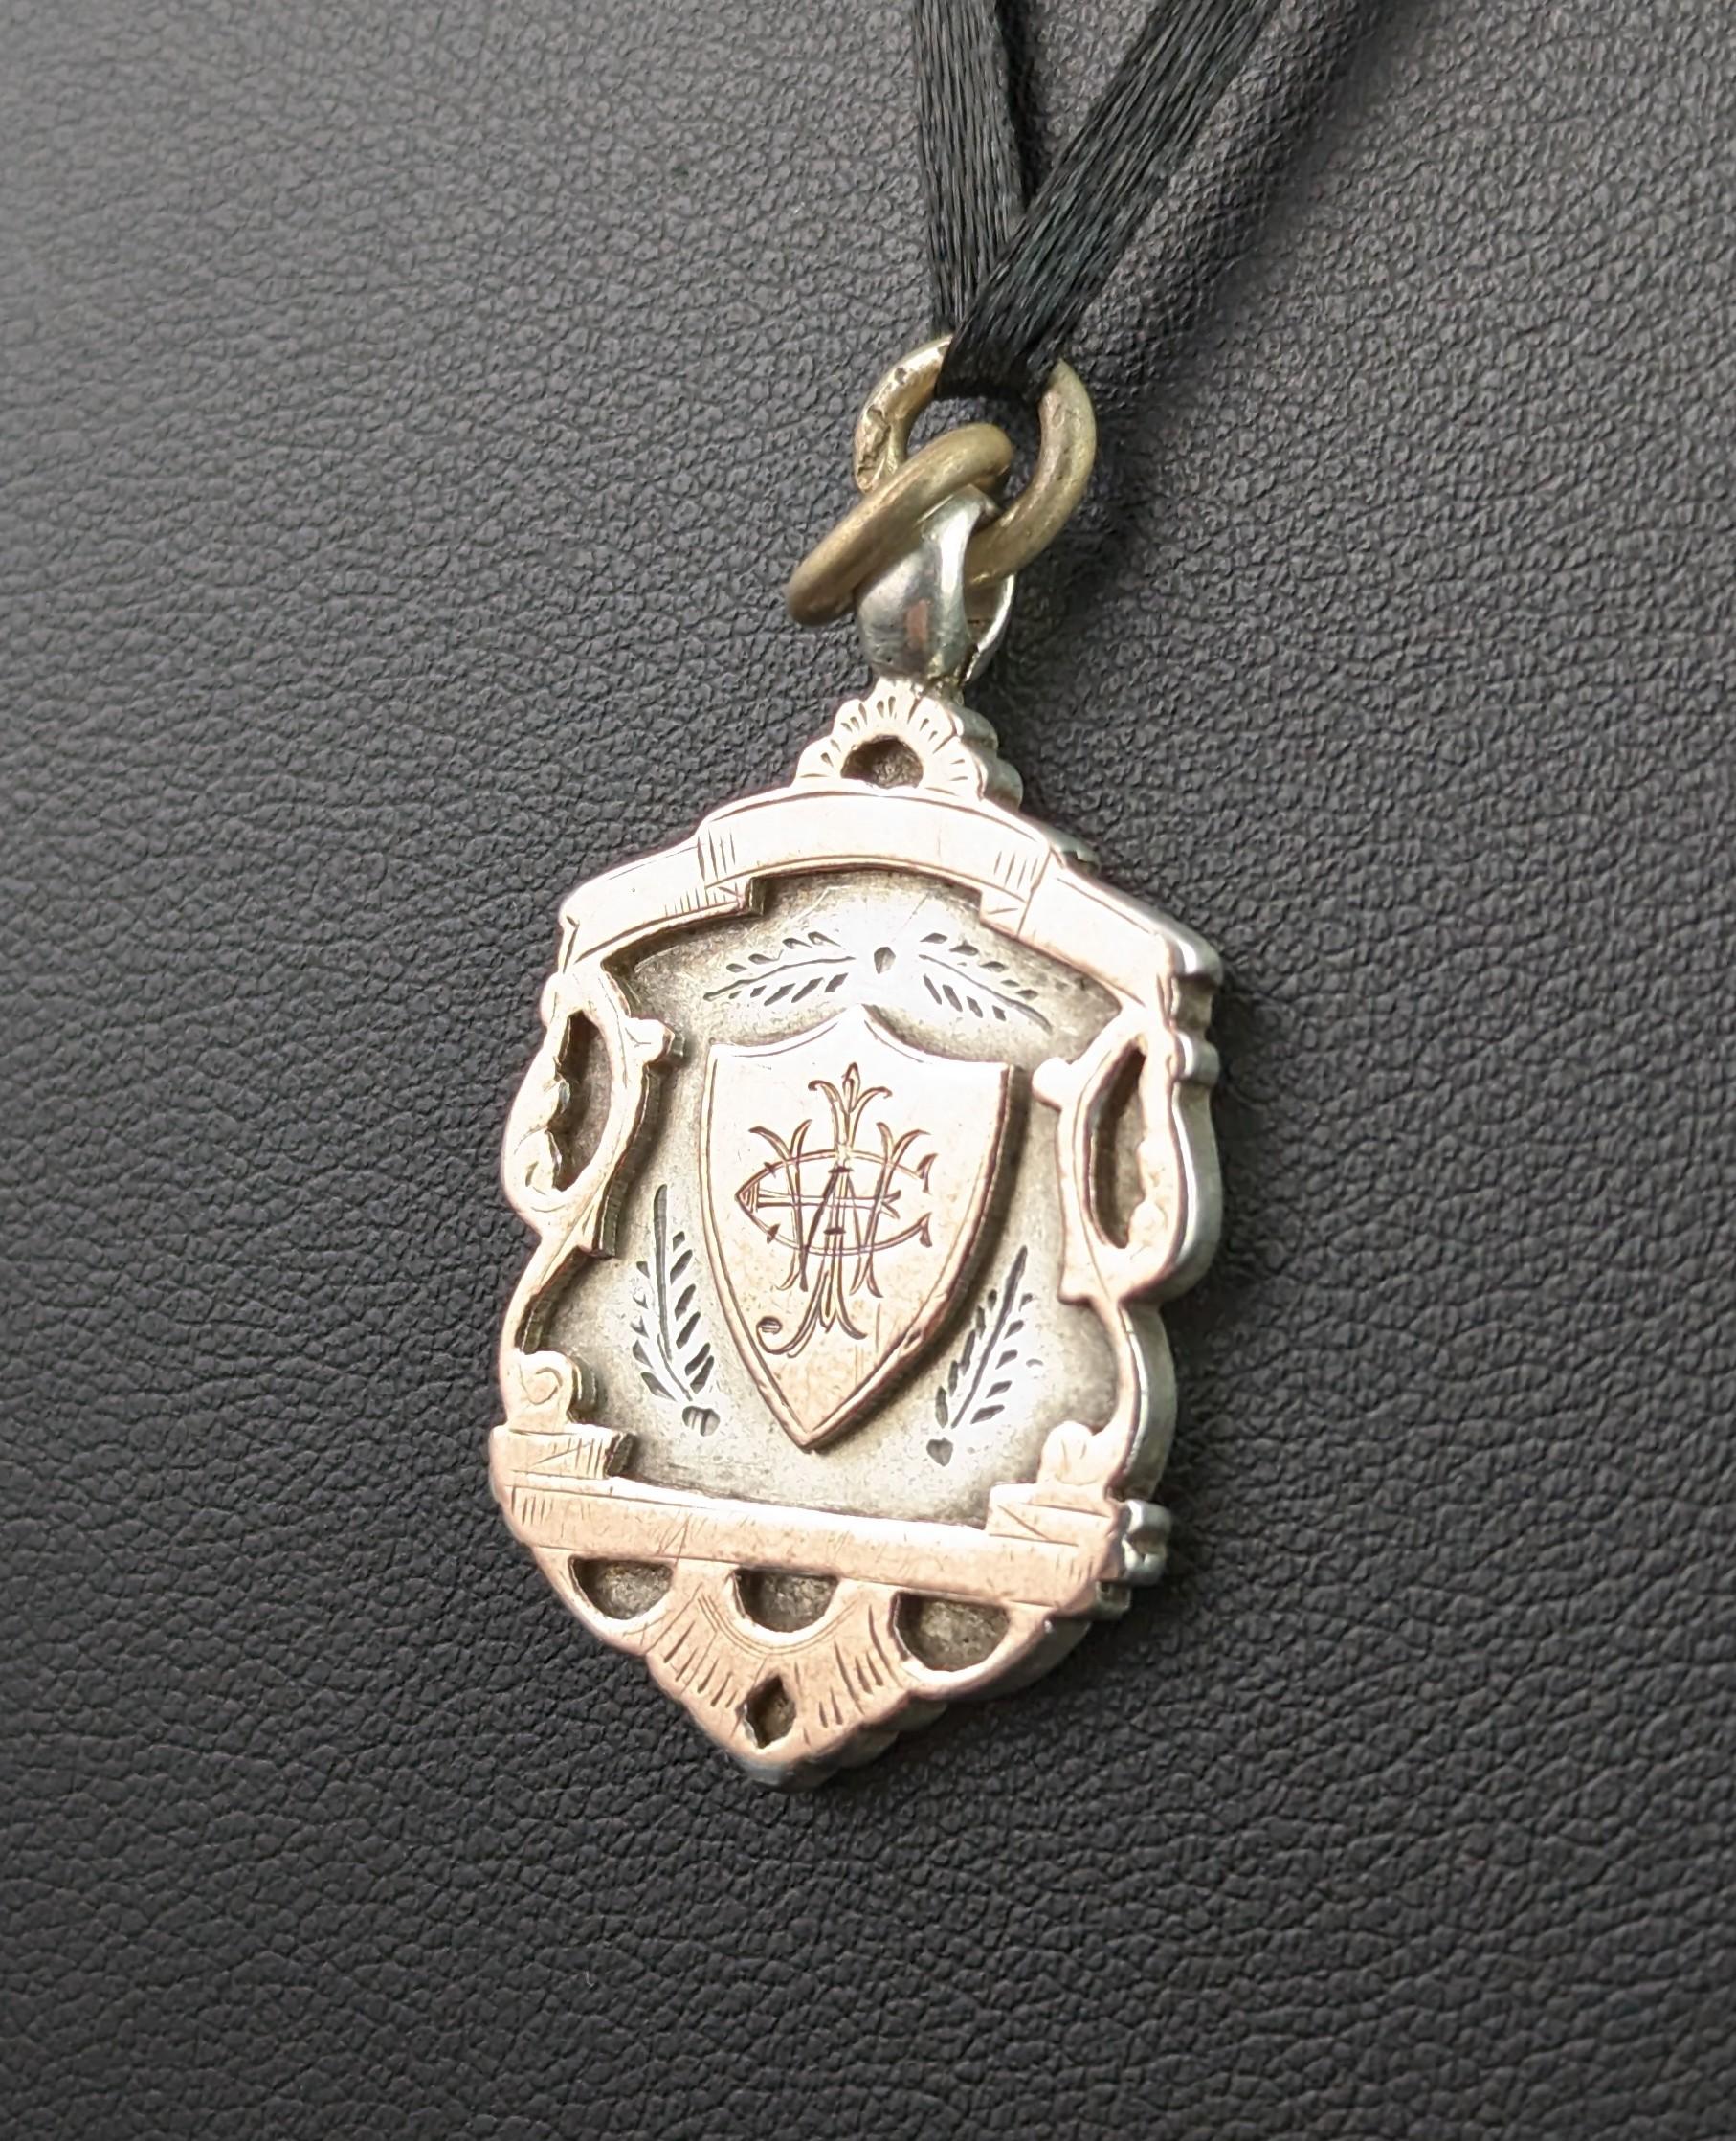 Antique shield fob pendant,  silver and 9k rose gold, Edwardian  3